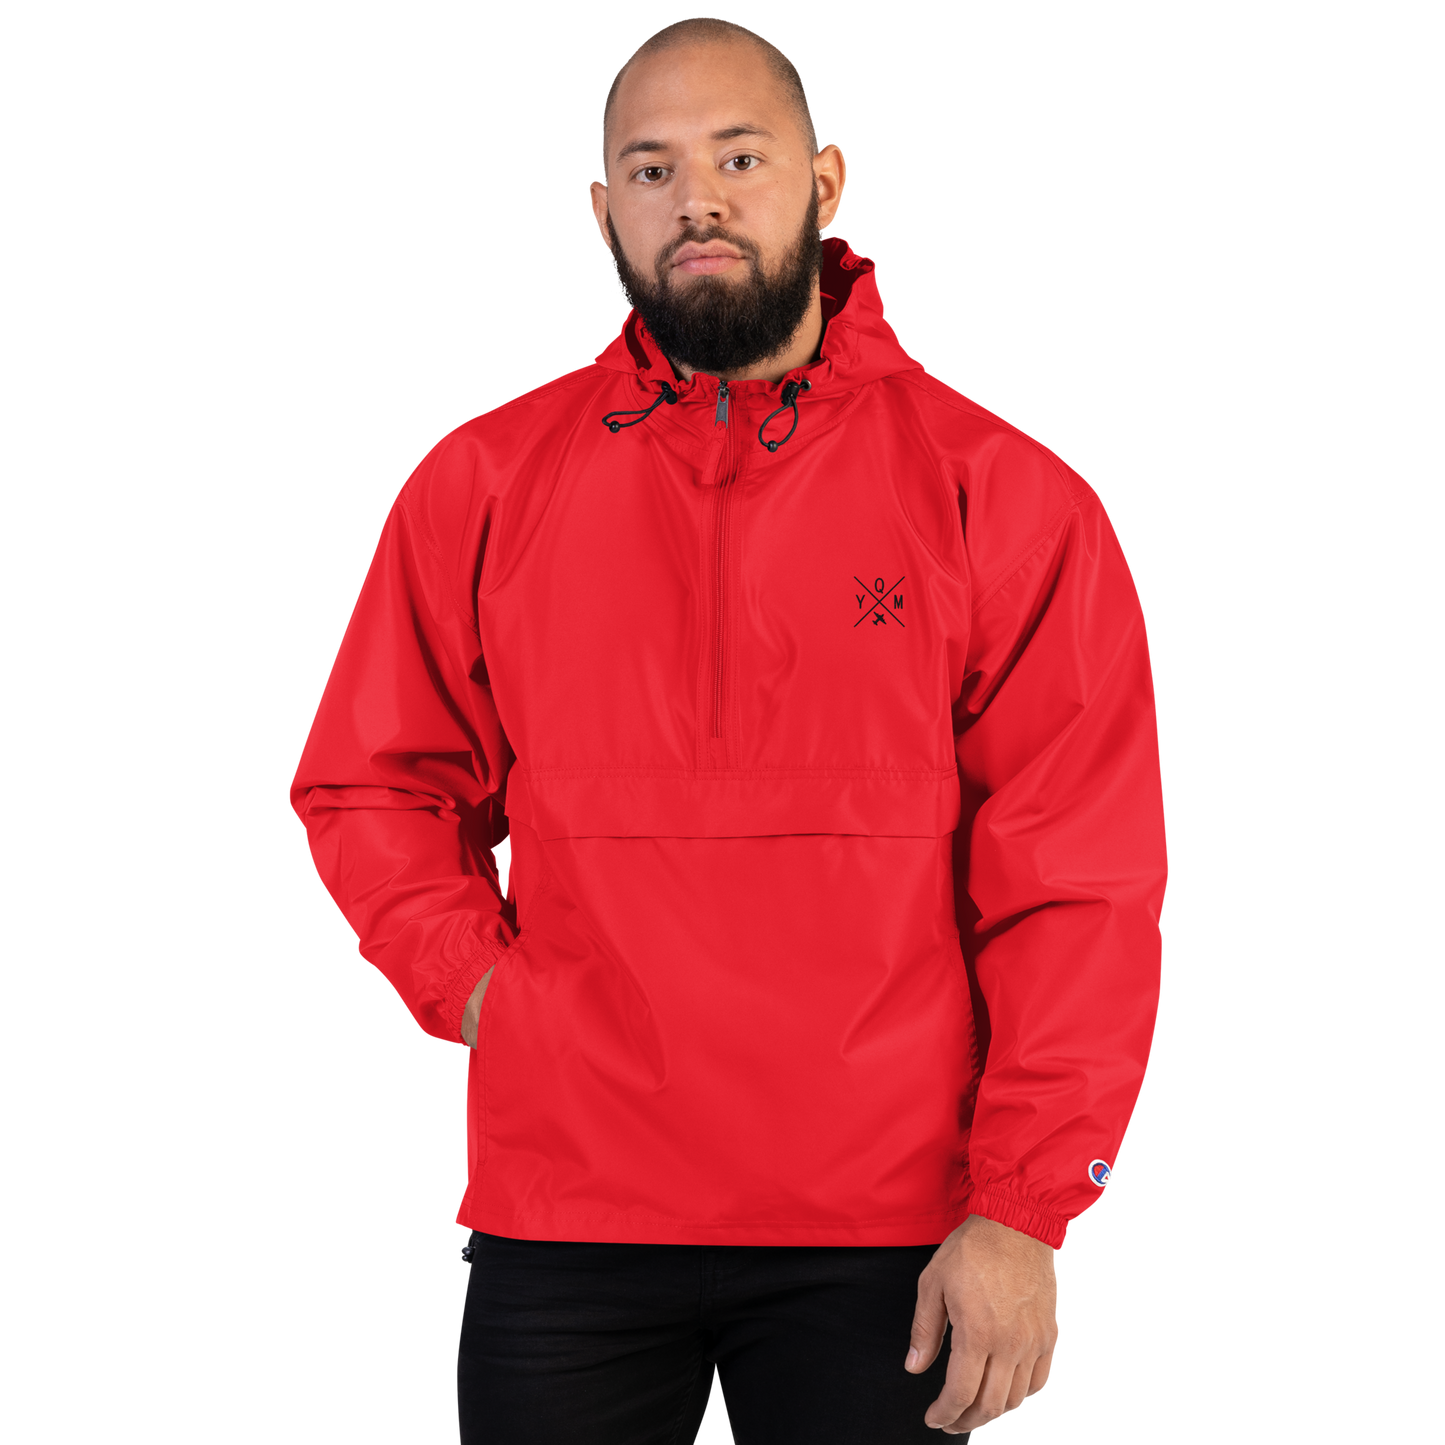 Crossed-X Packable Jacket • YQM Moncton • YHM Designs - Image 11